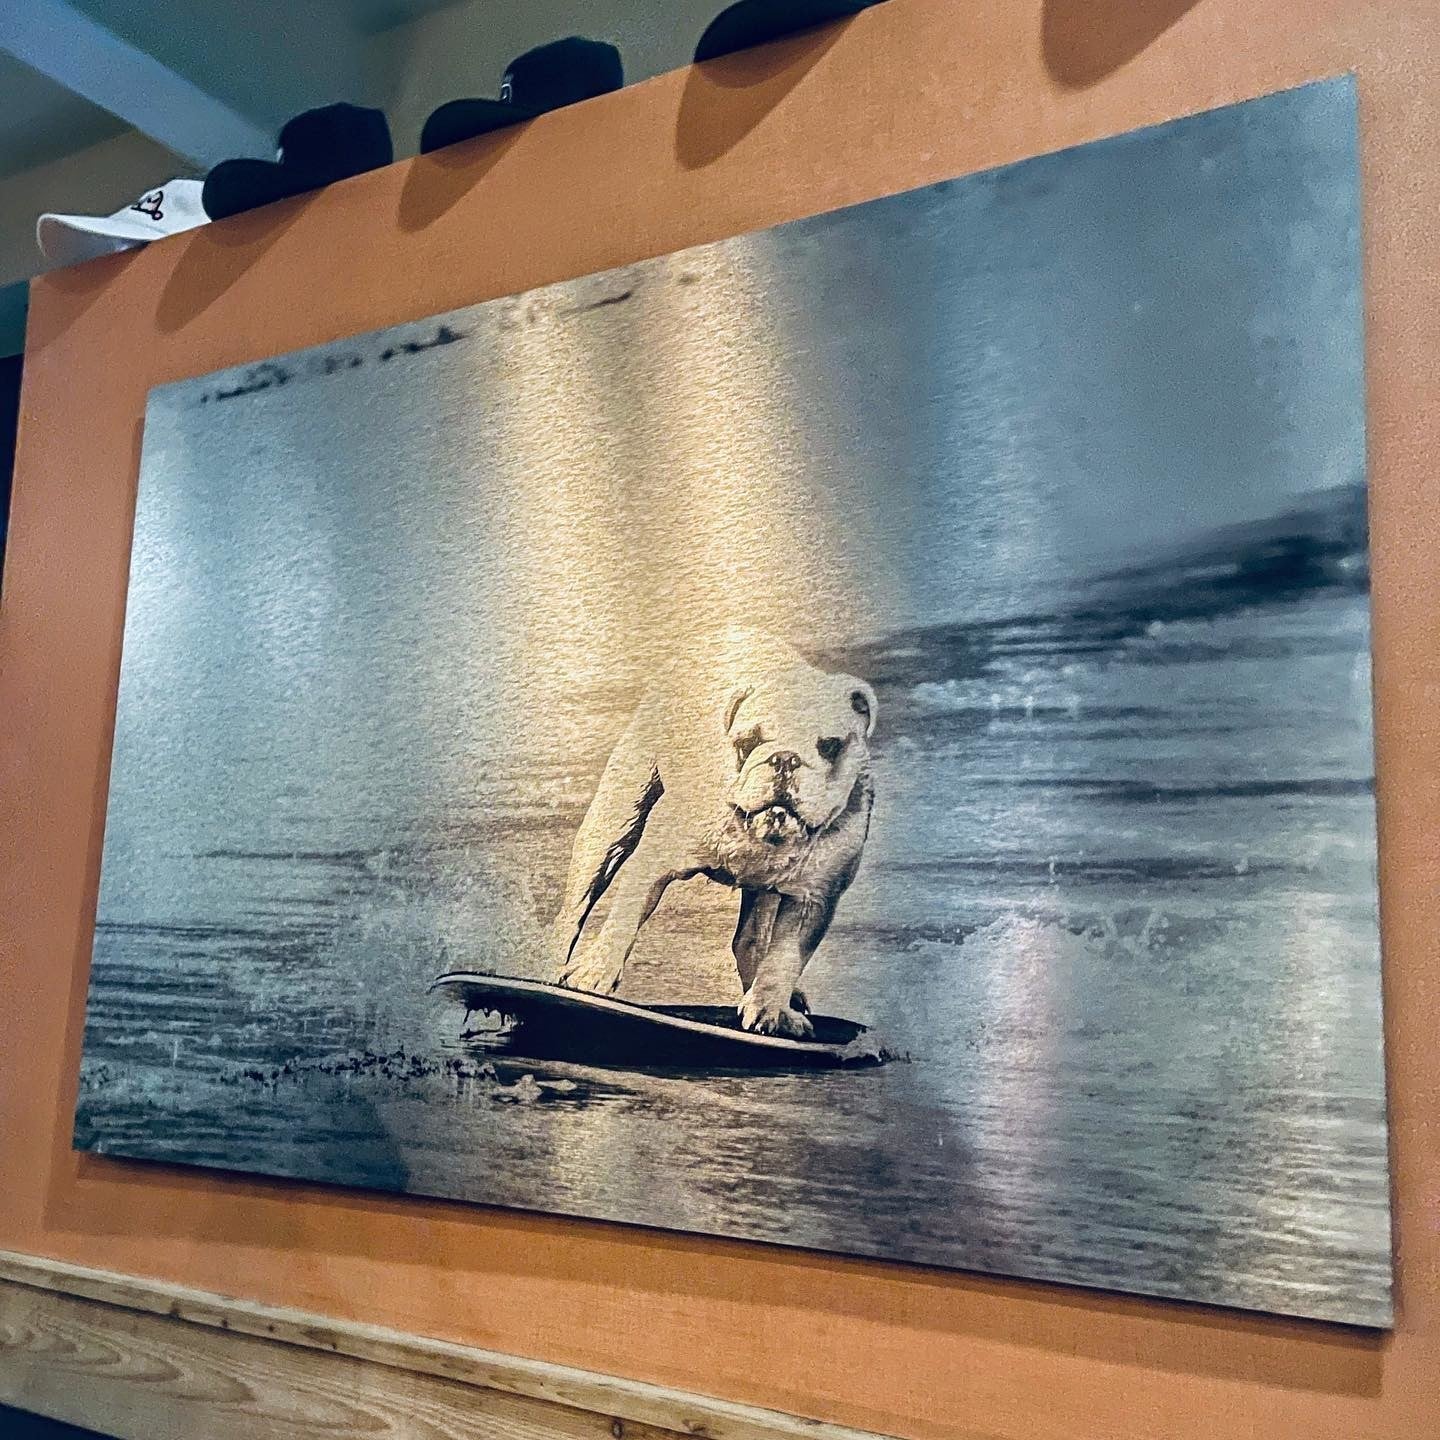 Surfing Dog Printed on Metal and Displayed in Restaurant in Victoria, BC